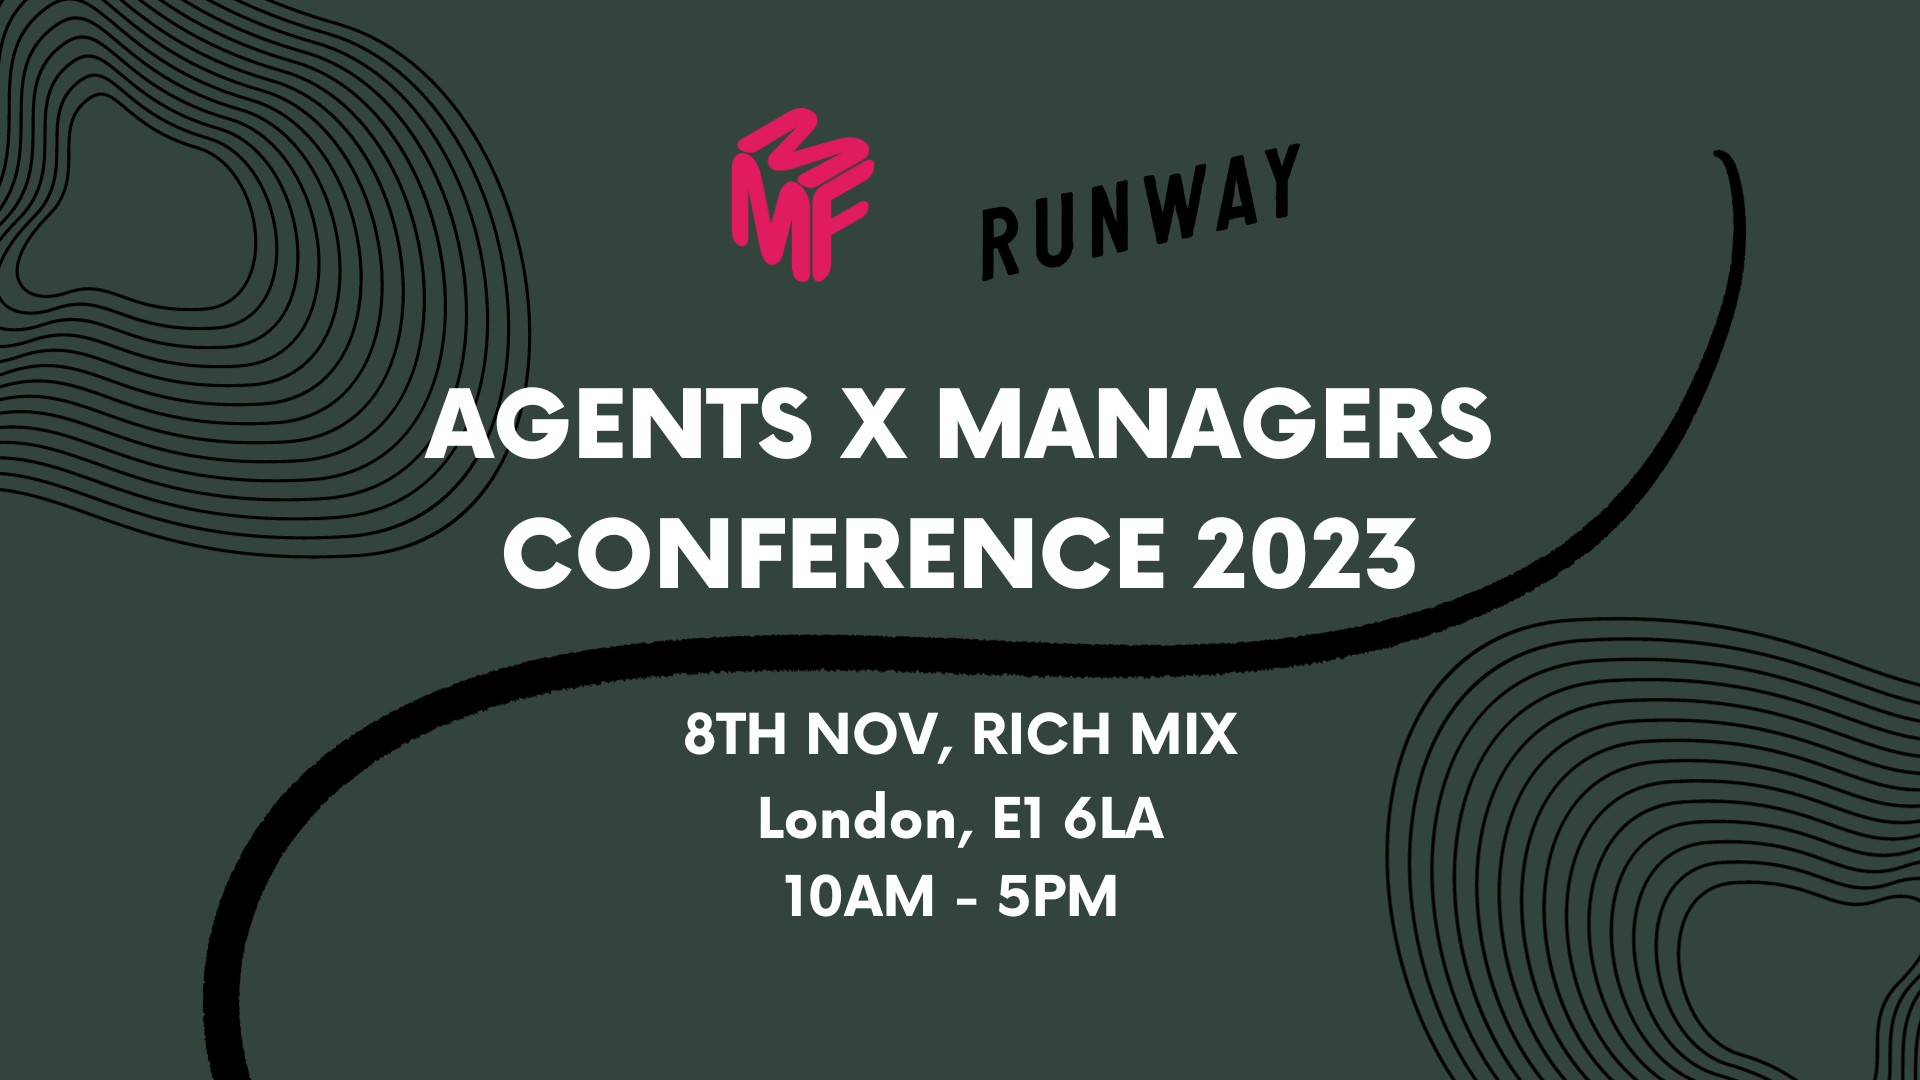 Agents X Managers Conference 2023